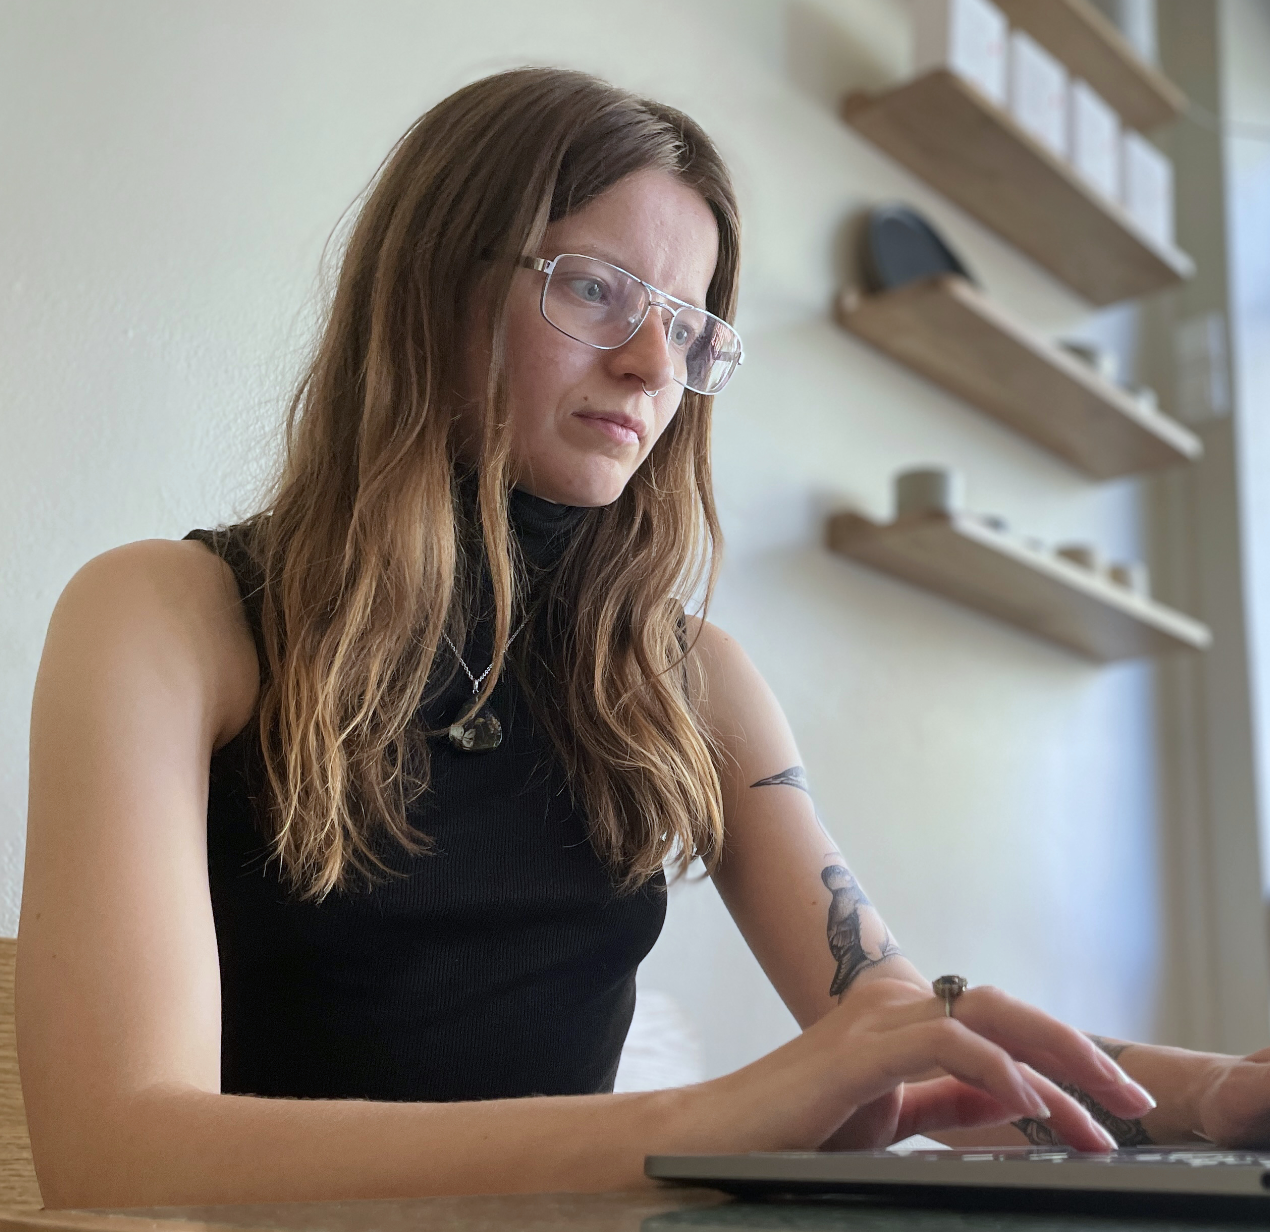 Sarah working, looking deeply focused at their laptop. They have long medium-brown hair, metal rectangular framed glasses, and are wearing a black top.